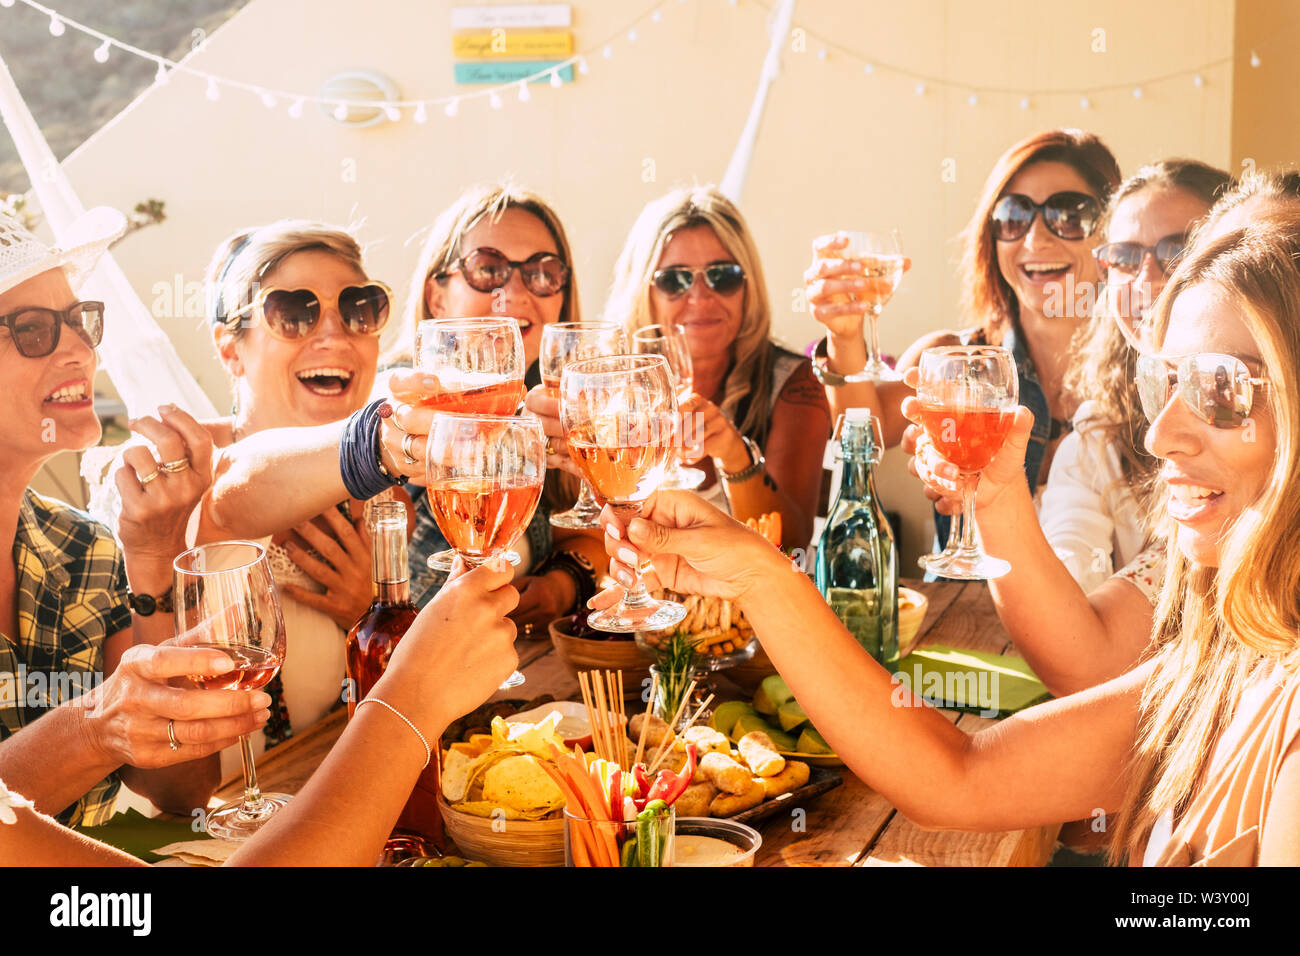 People having fun in friendship - group of cheerful happy caucasian young women laugh and smile together clinking and toasting with red wine during ce Stock Photo